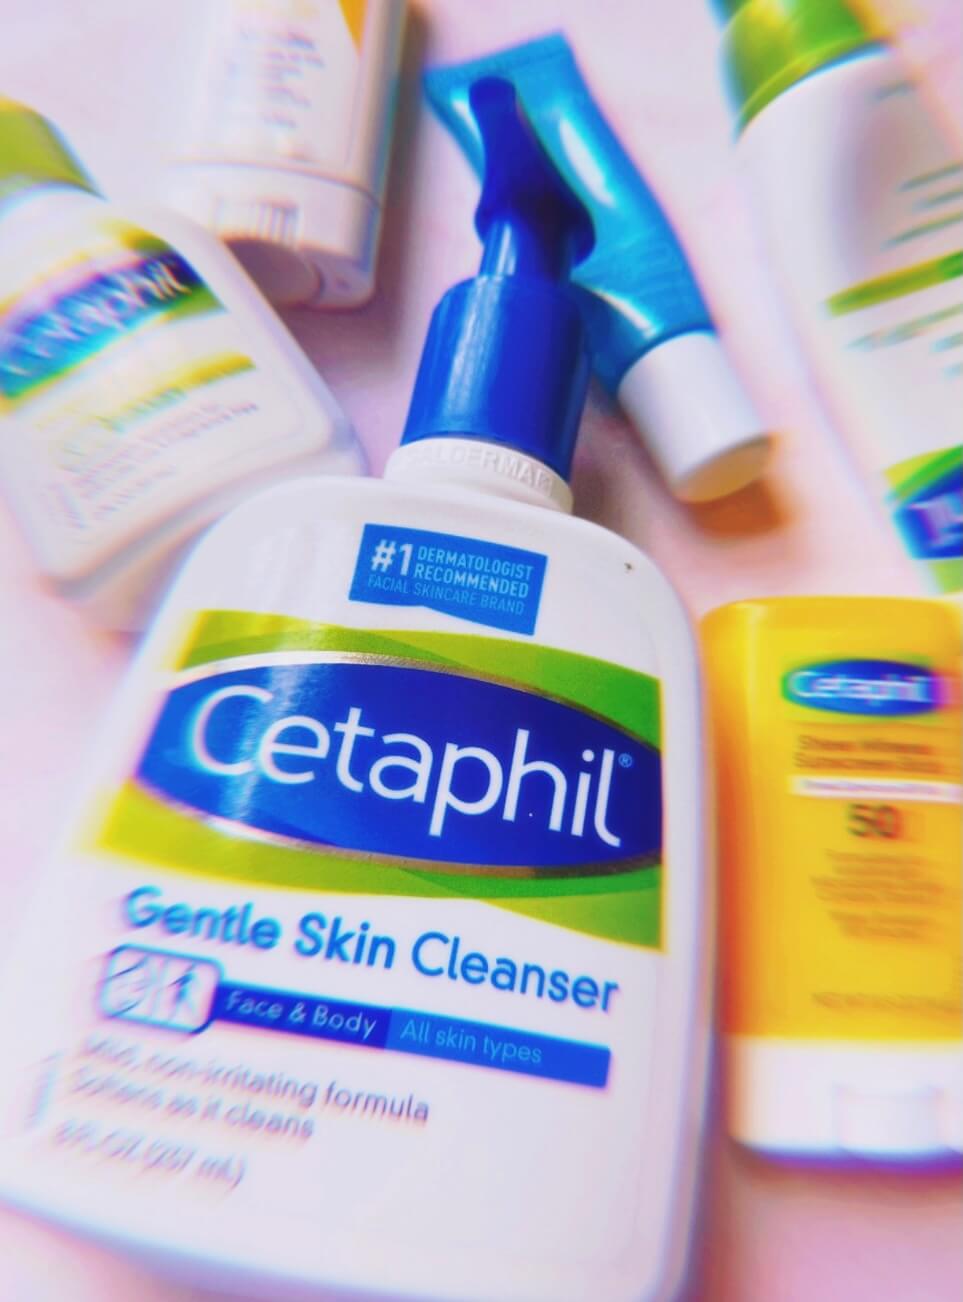 Image of Cetaphil Cleanser and other face products